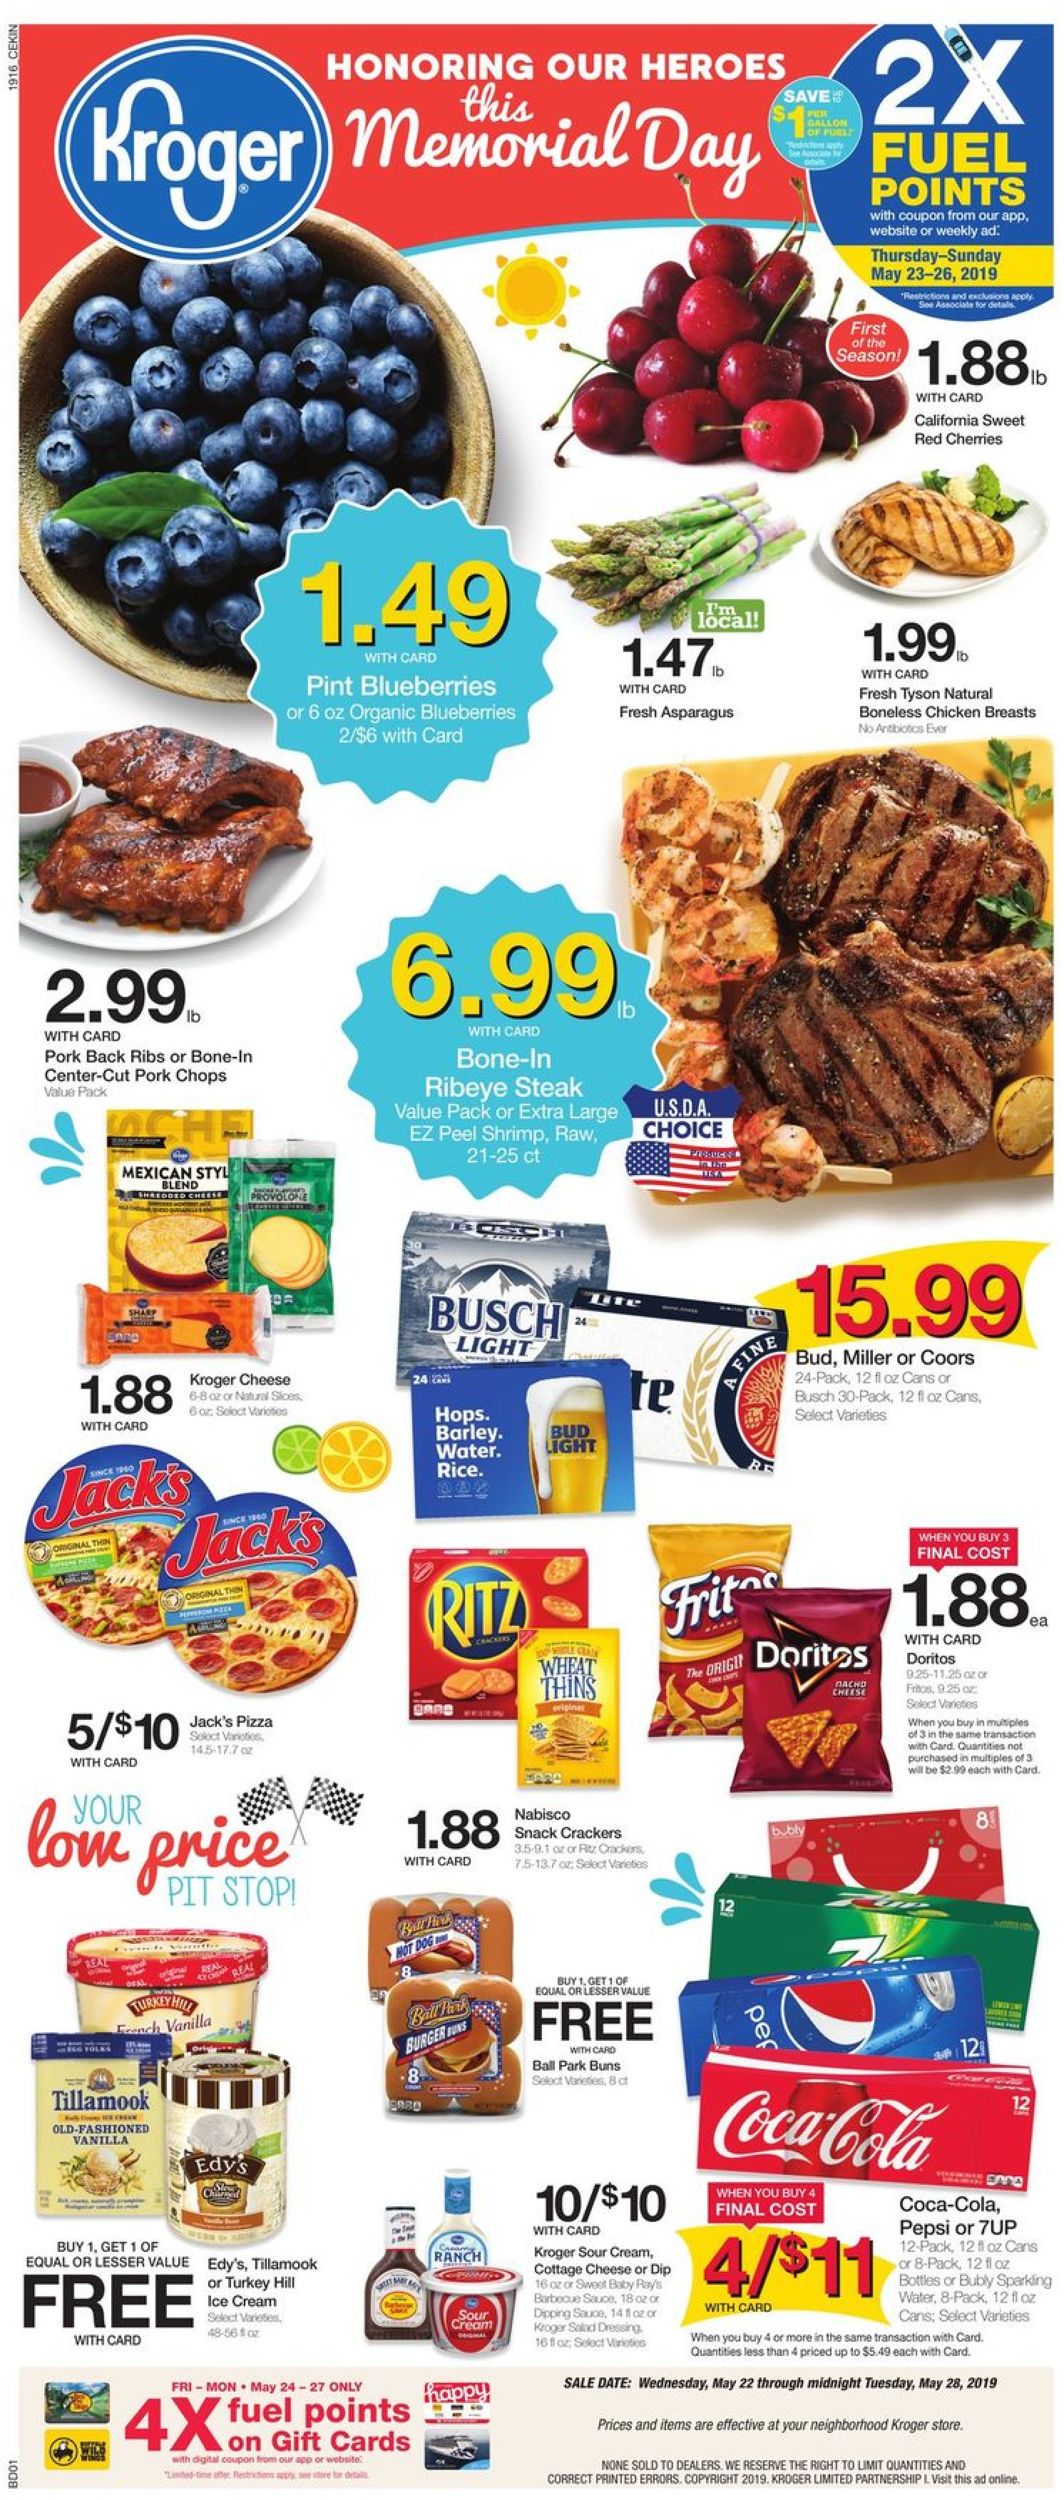 Kroger Current weekly ad 05/22 - 05/28/2019 - frequent-ads.com